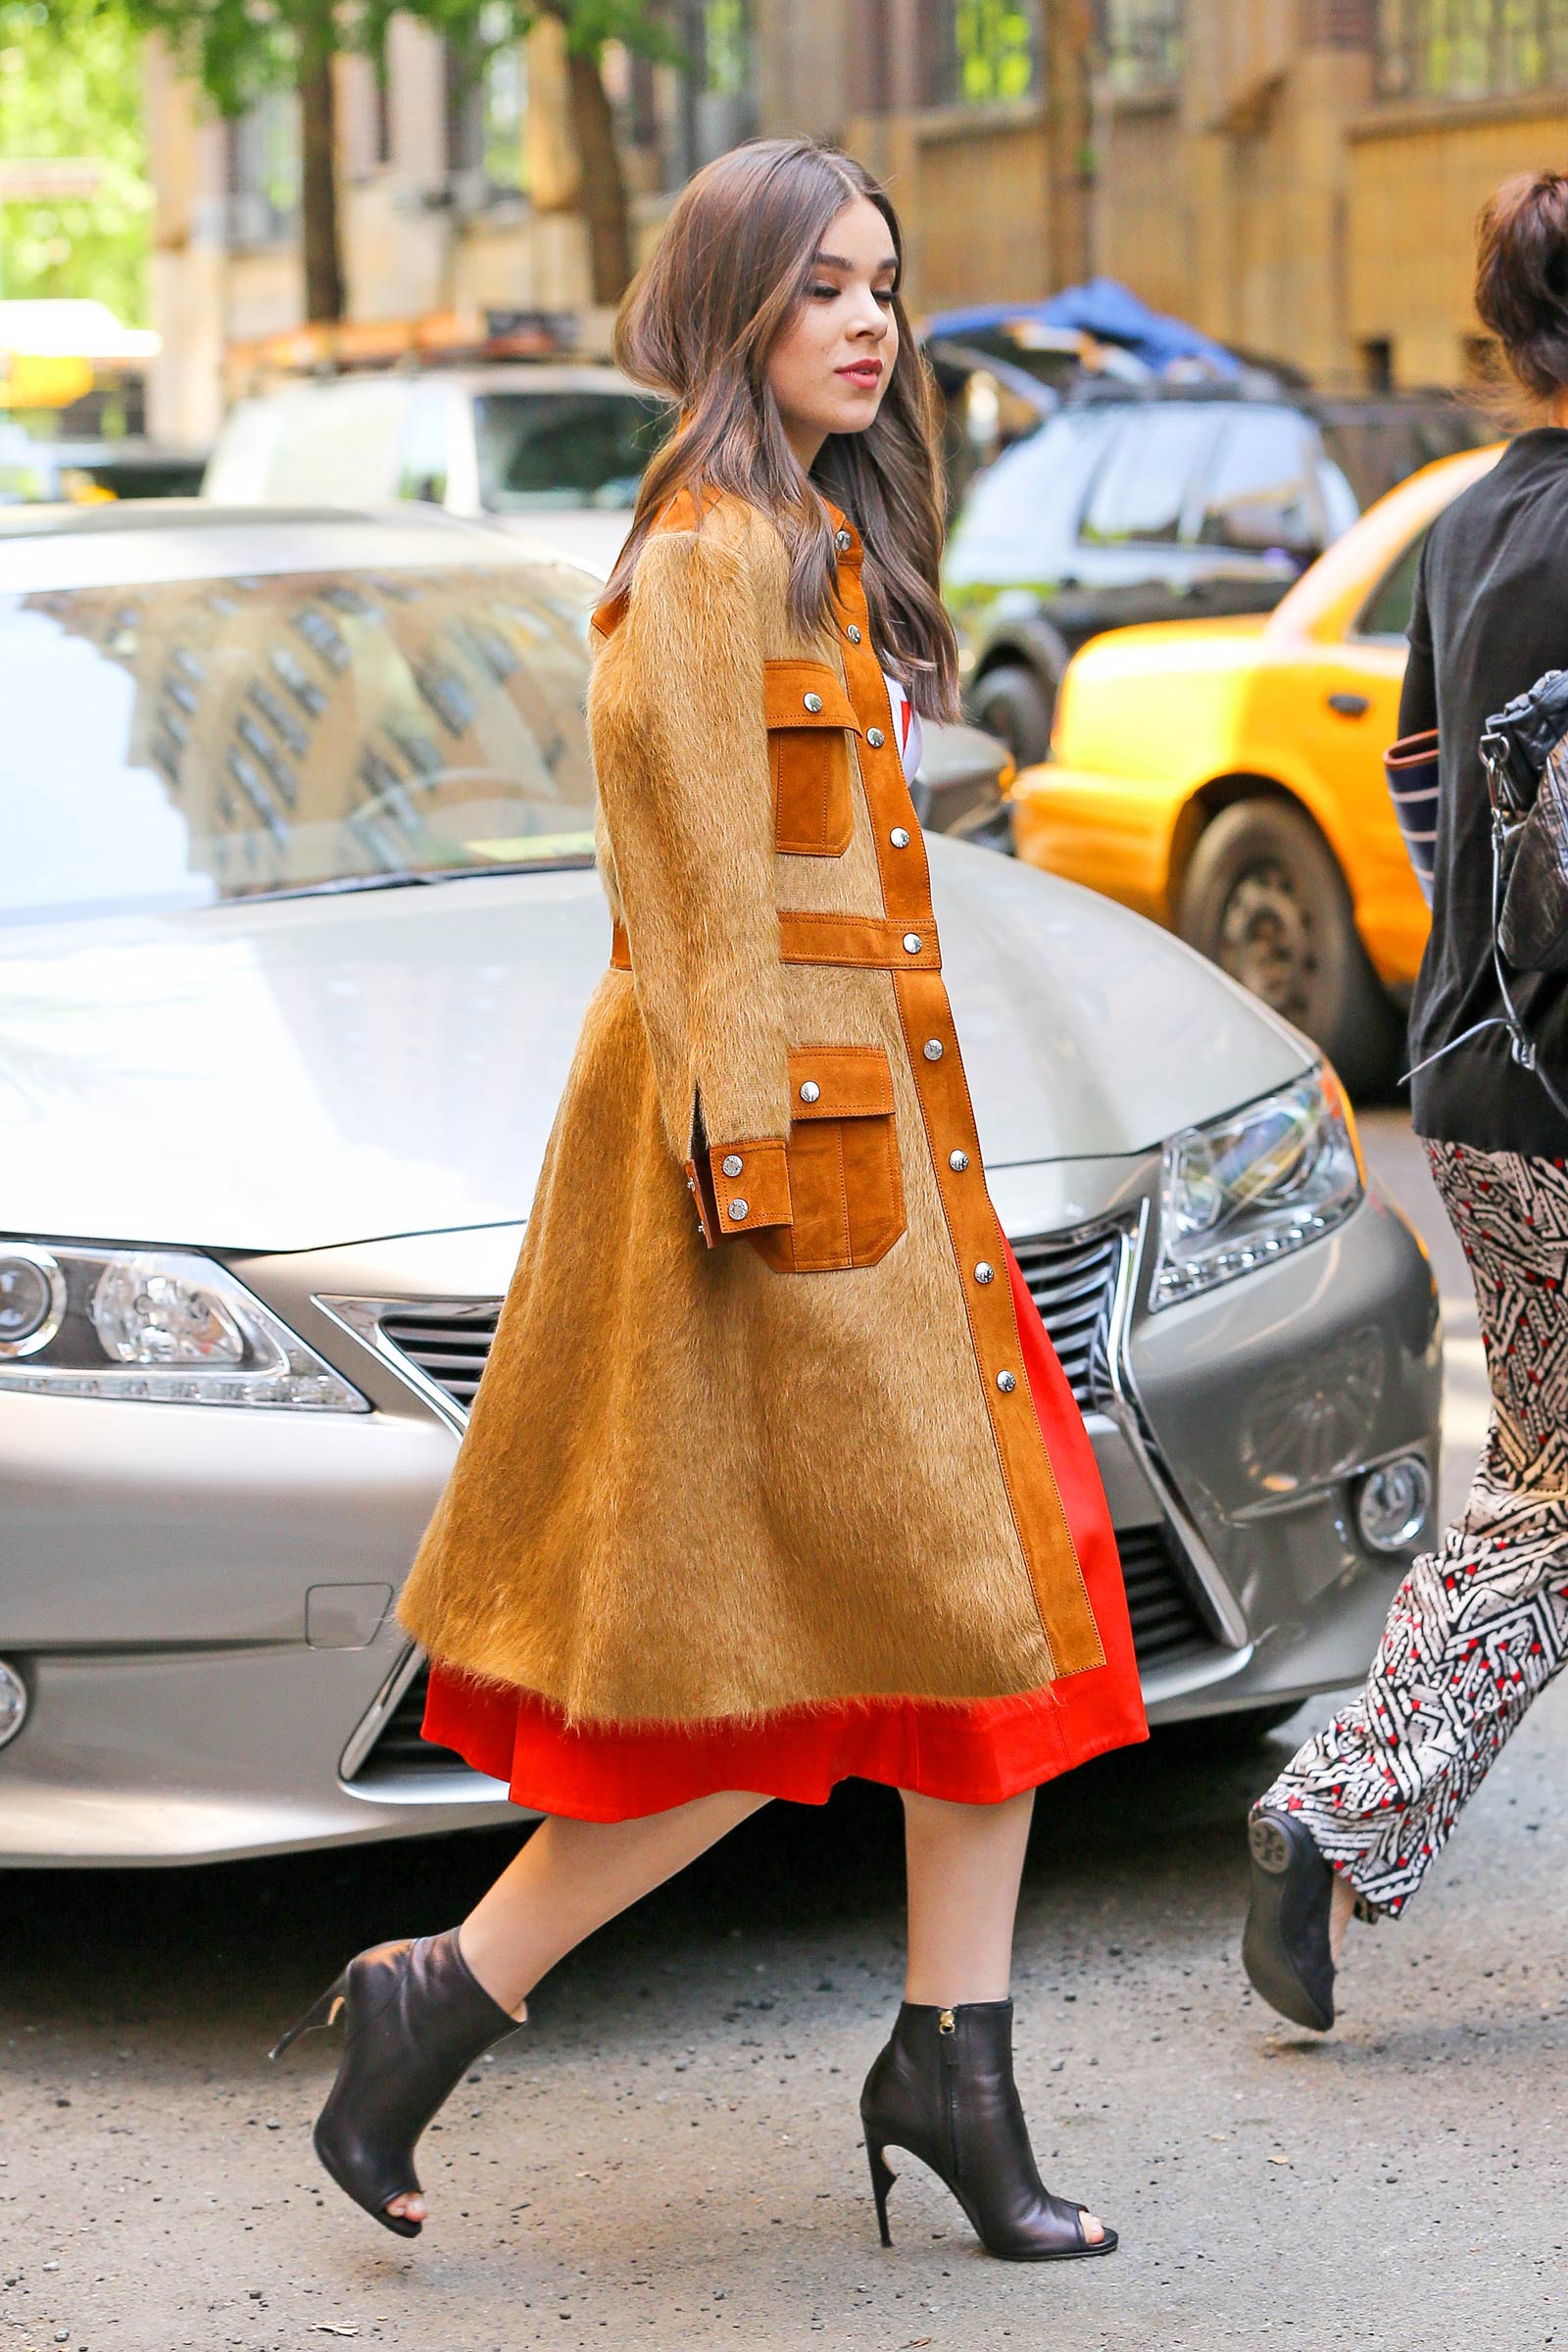 Hailee Steinfeld leaving The View in NYC